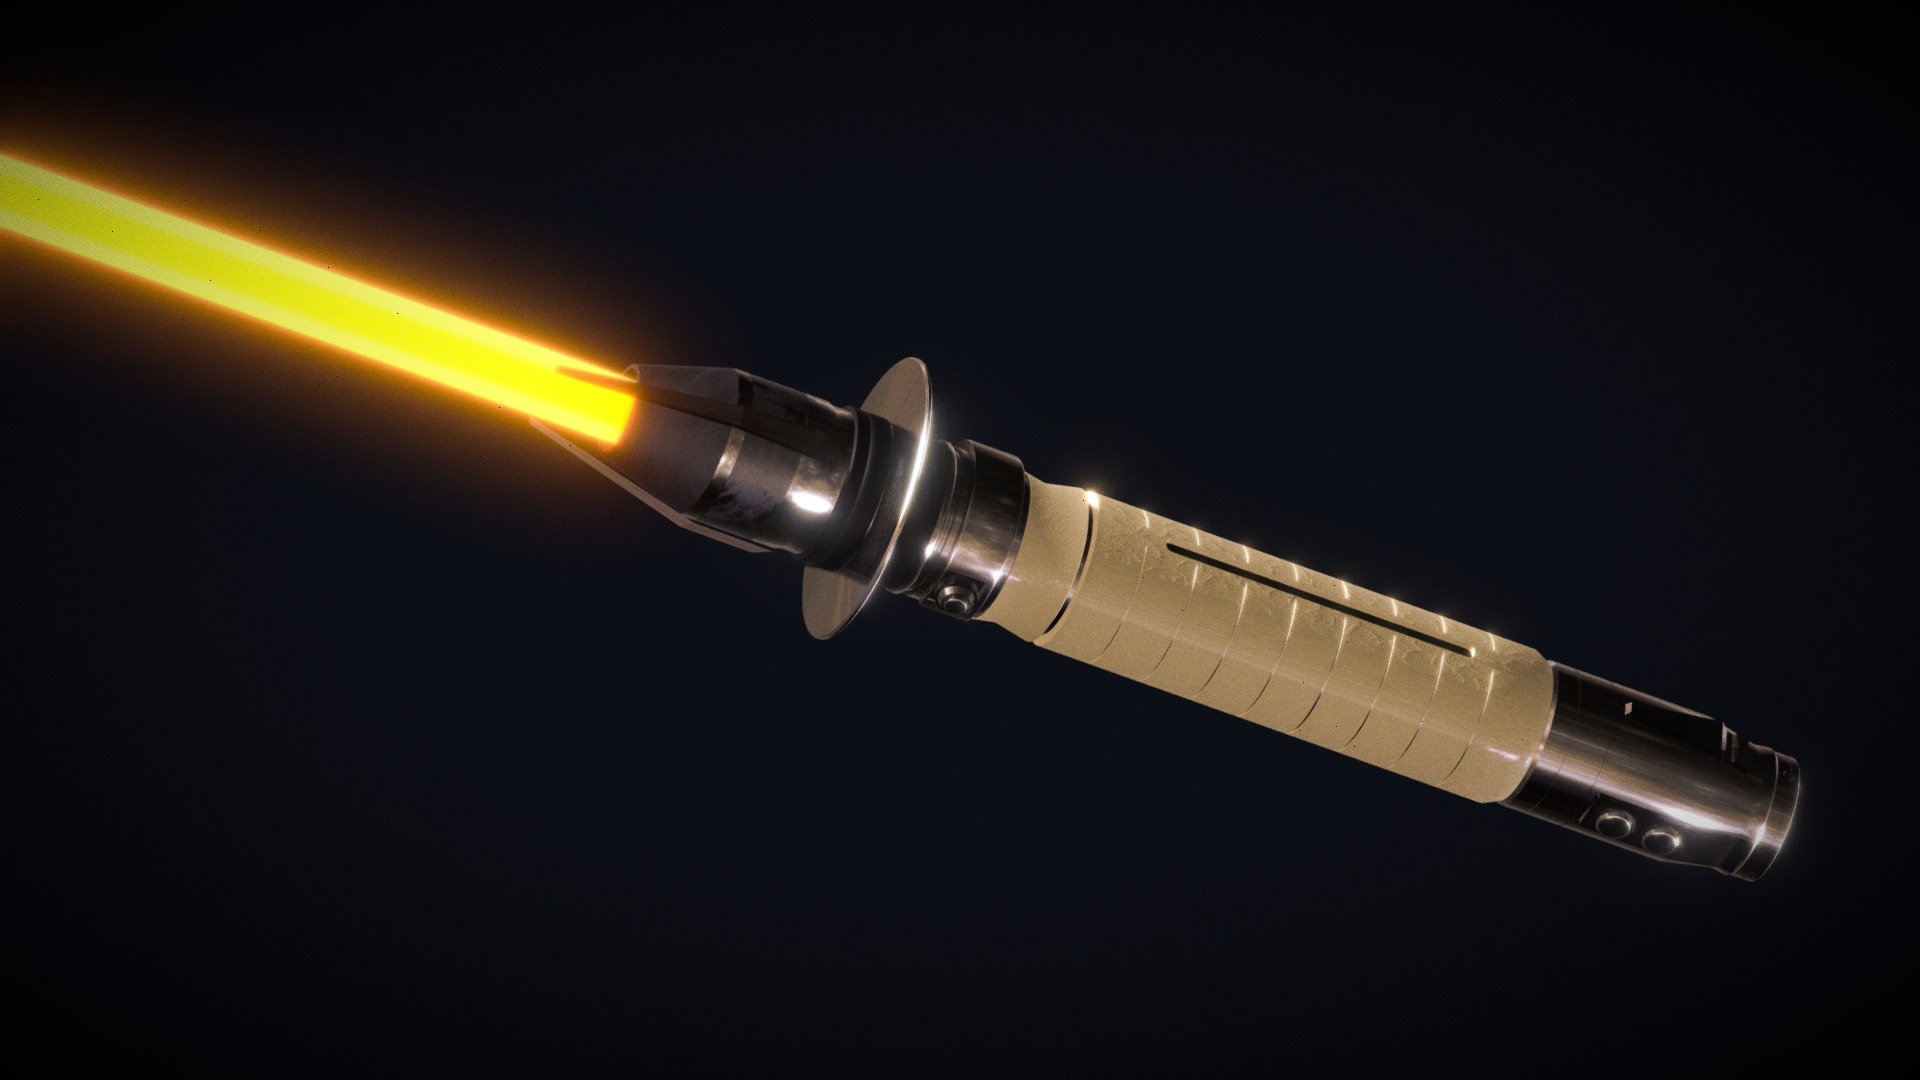 This is my first 3D project I made with Blender. 
Lightsaber of Shin Hati, Lord Baylan Skoll's apprentice in Star Wars' AHSOKA mini series. Hoping to see more of her appearance in Star Wars' future projects!

note: it's originally orange sort of red kyber crystal but idk why it looks more yellowish in here x 3d model